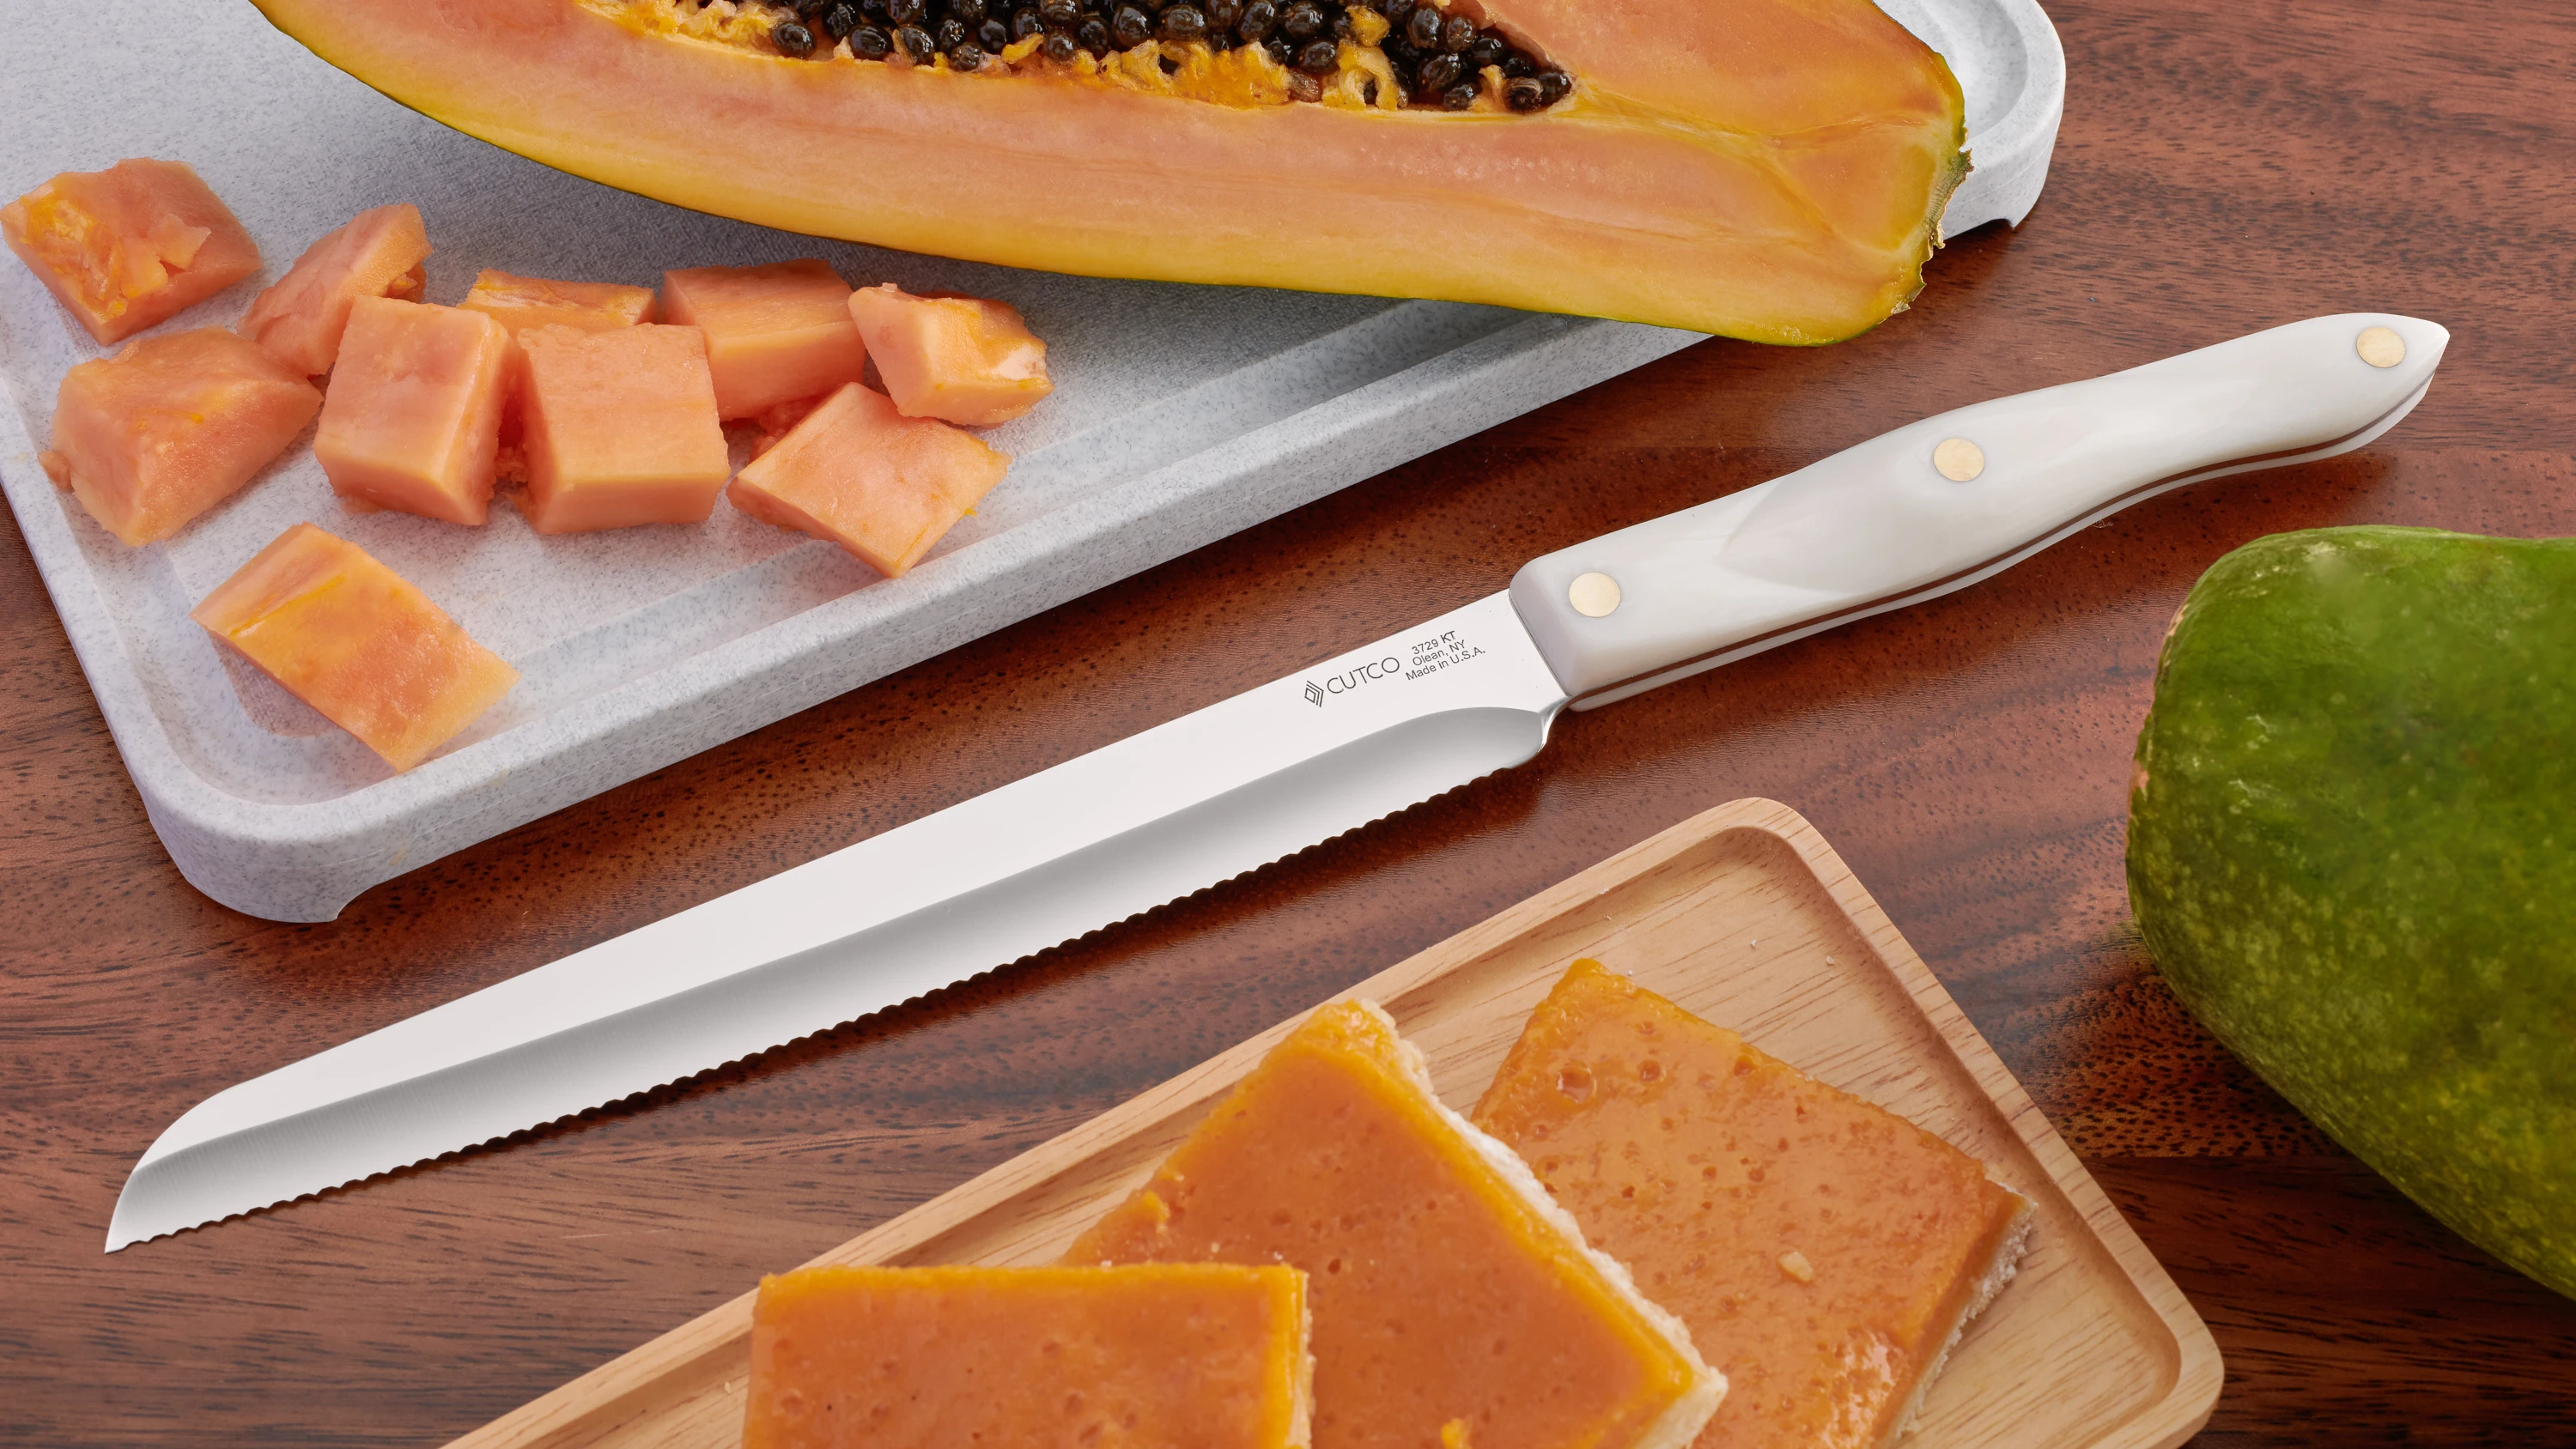 Cutco Carving Knife: Carve with Confidence